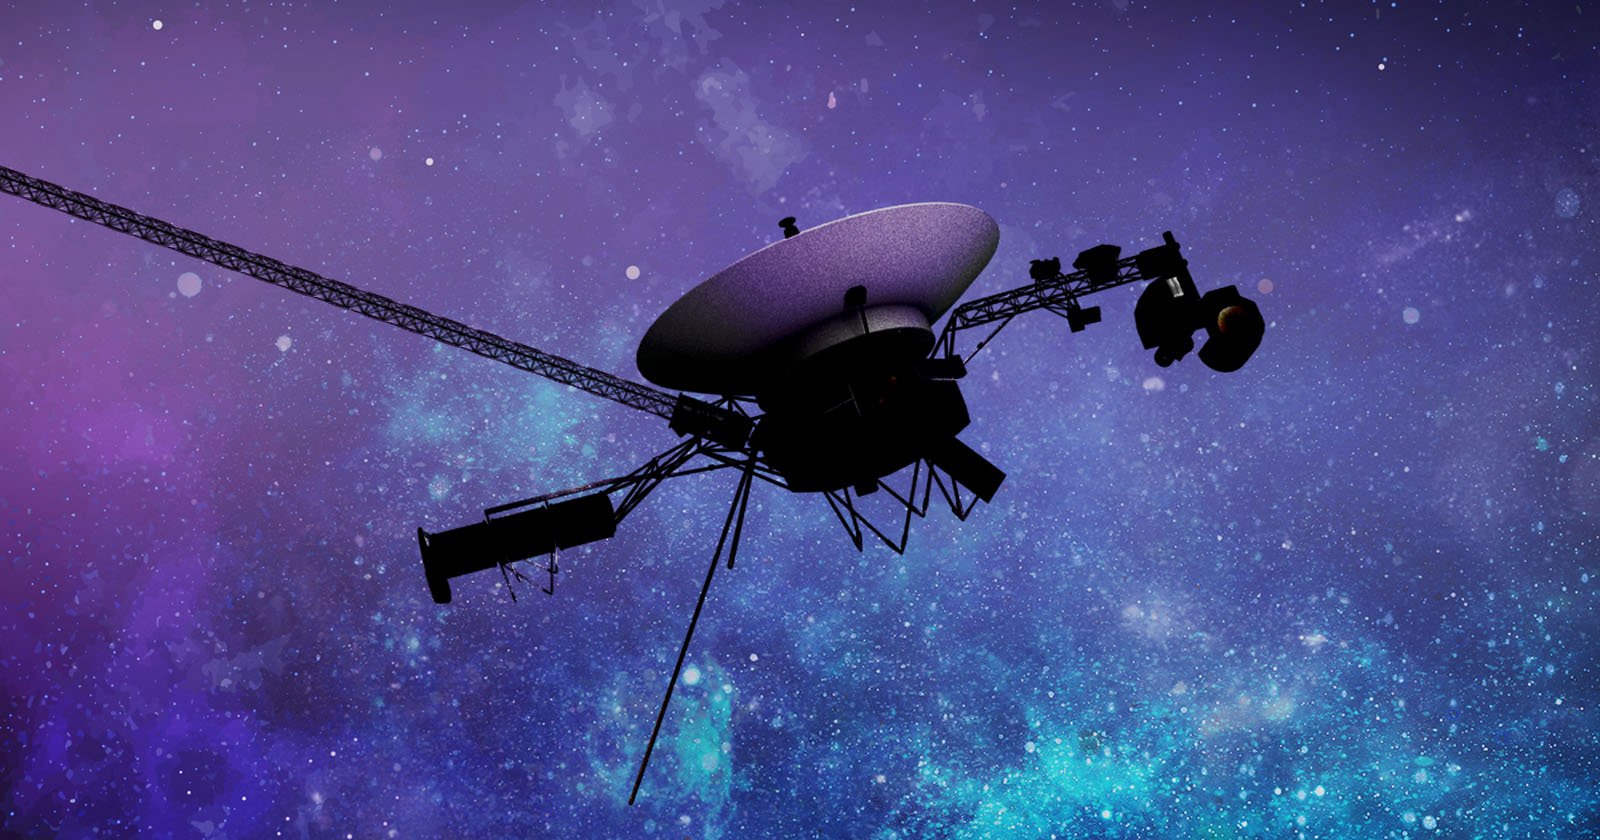  nasa engineers are desperately trying save voyager 